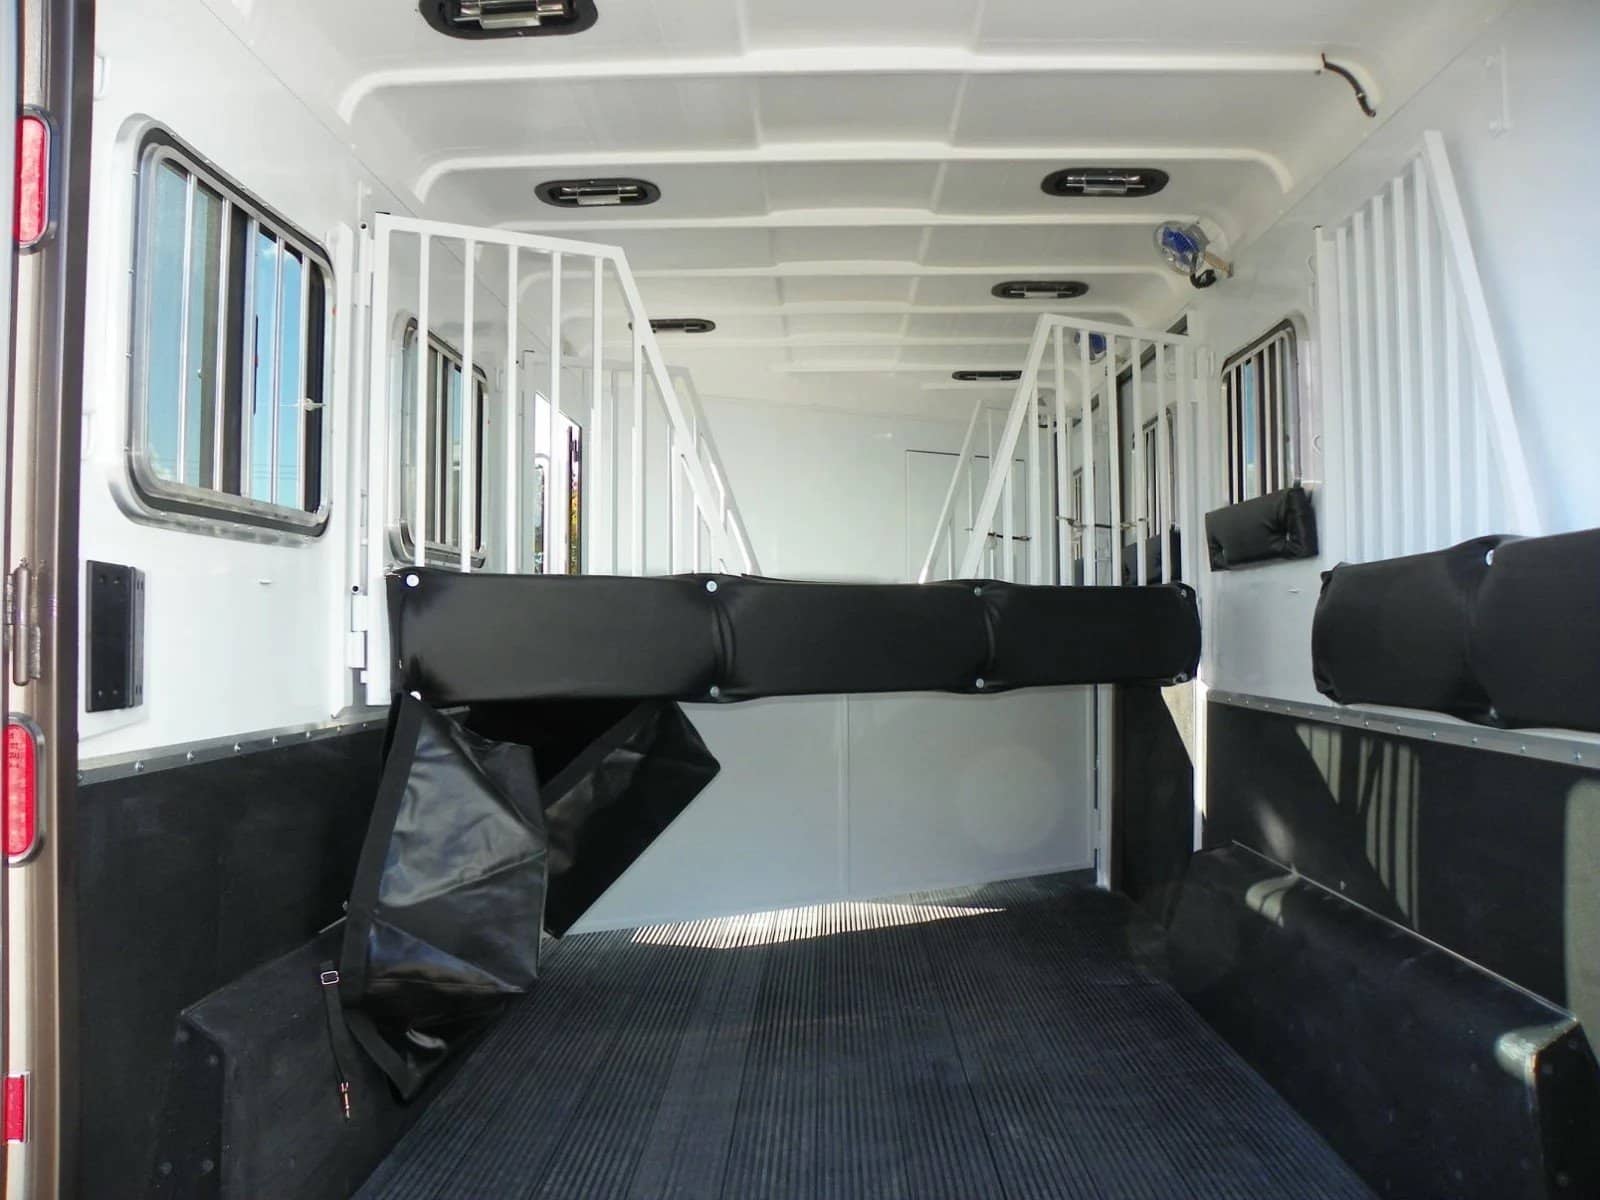 Higher ceilings work best for draft horse trailers